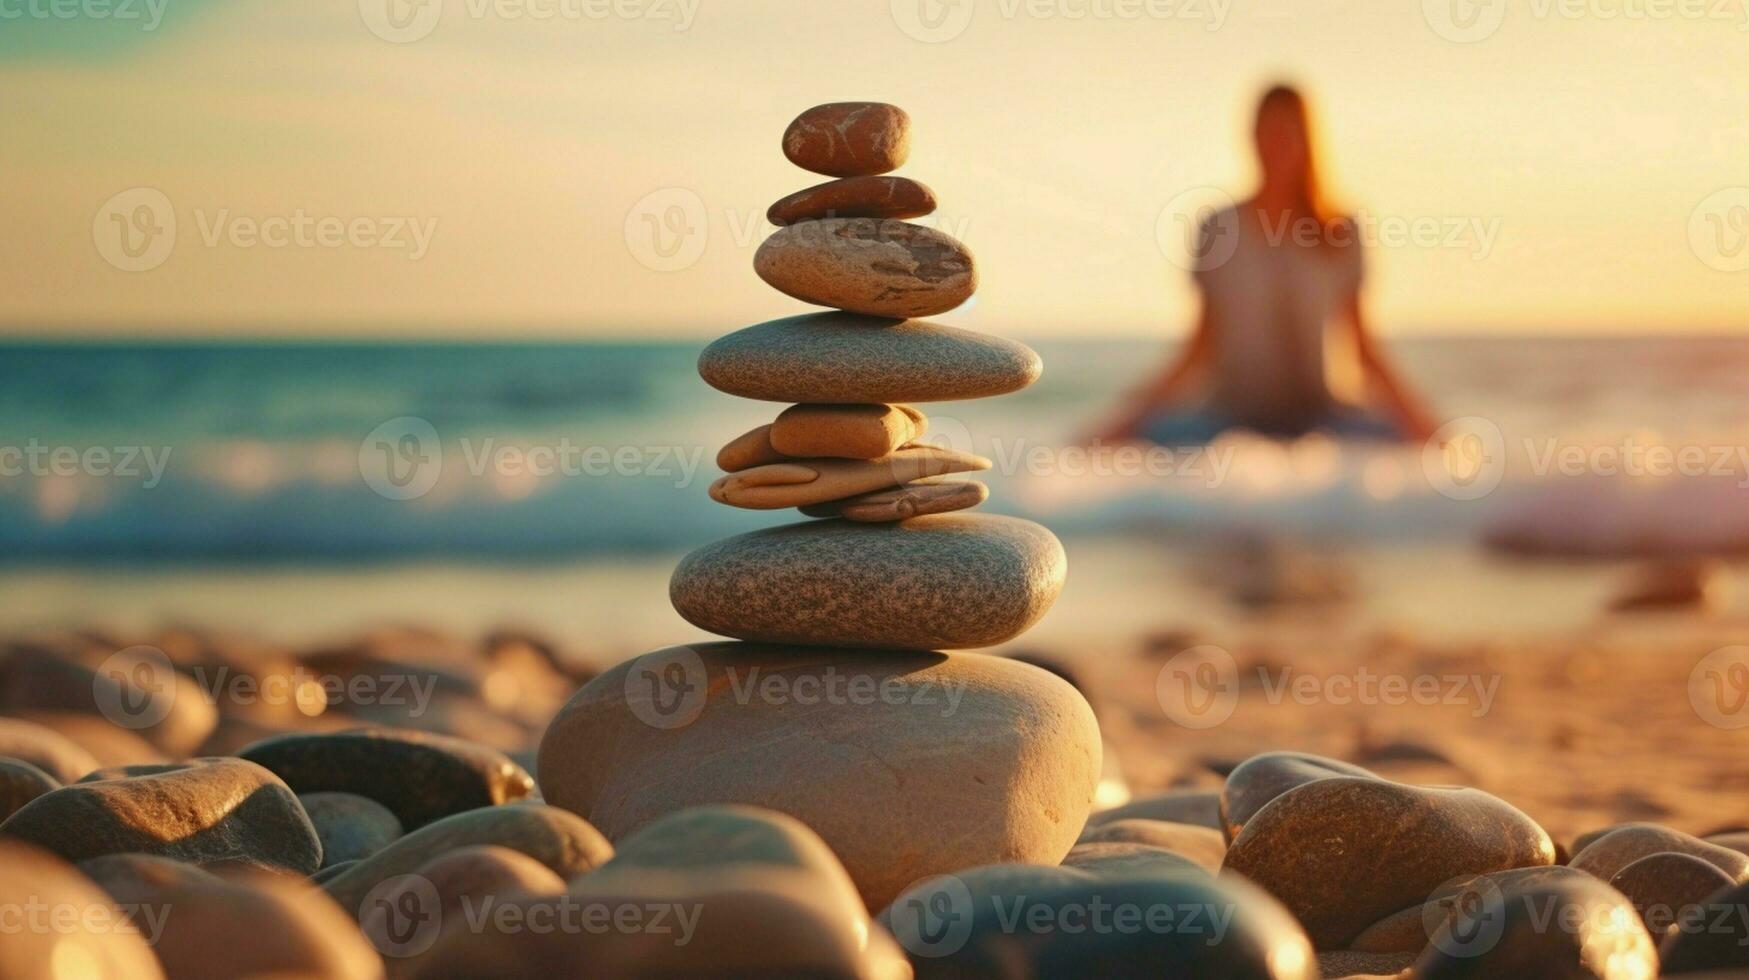 On a sunny day with clear skies at sunset, a woman balances pebbles to form a pyramid on the beach with a blue sea in the background. photo